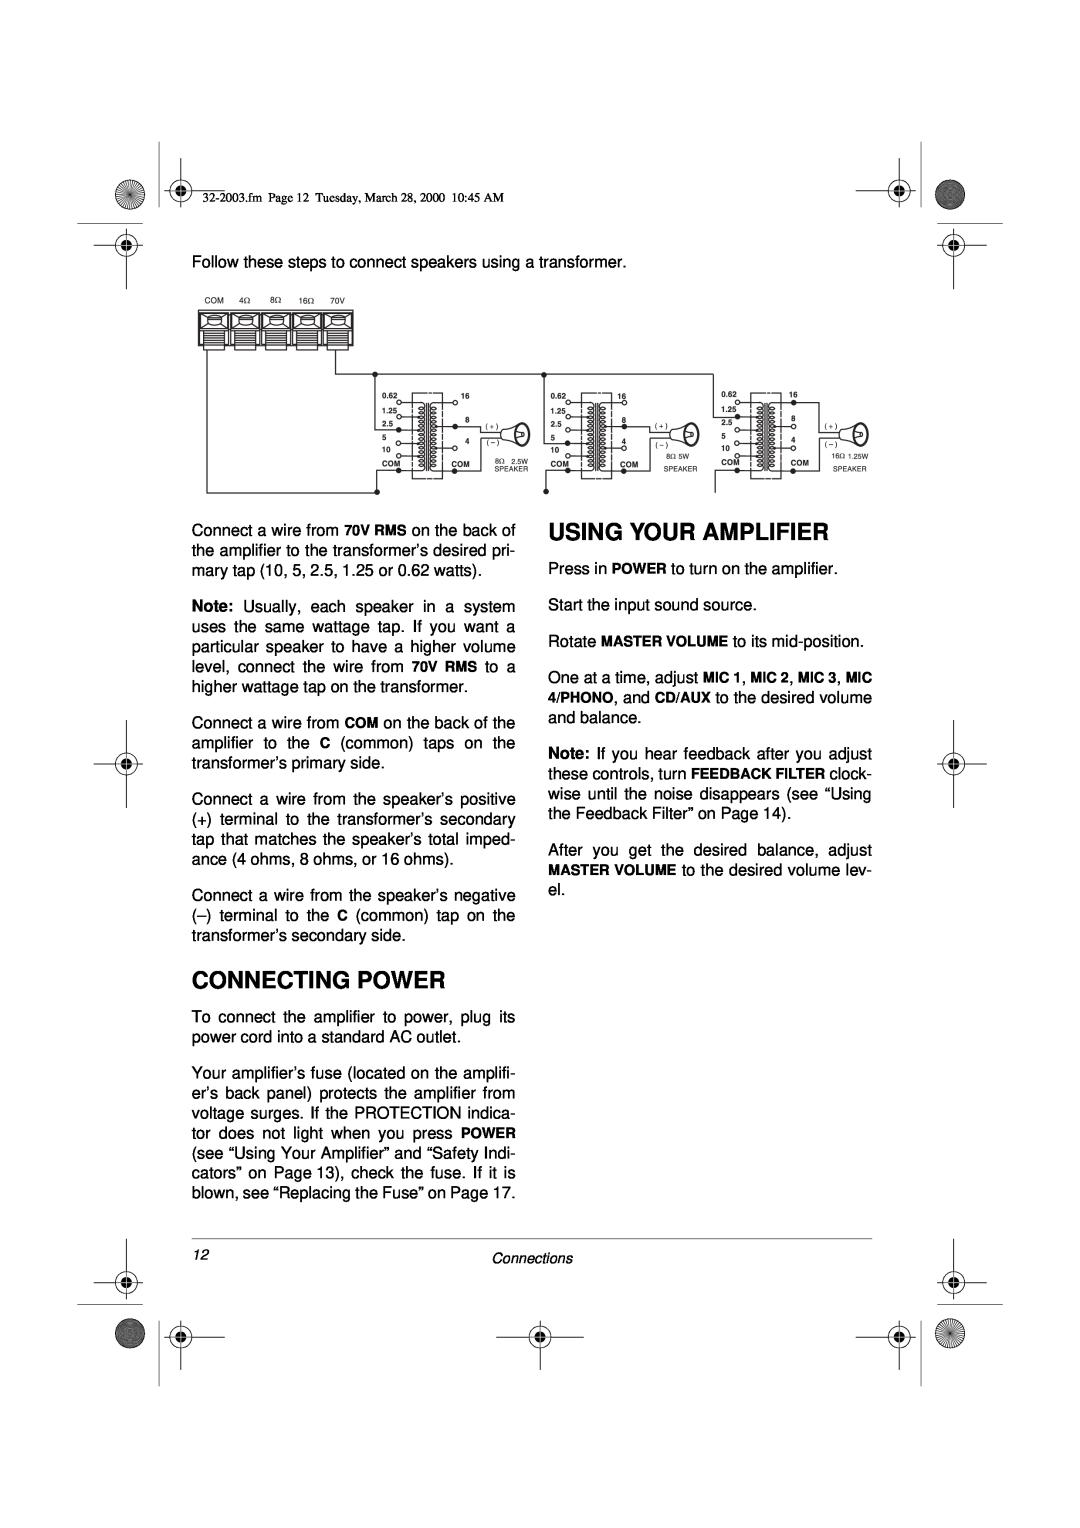 Radio Shack MPA-125 owner manual Using Your Amplifier, Connecting Power 